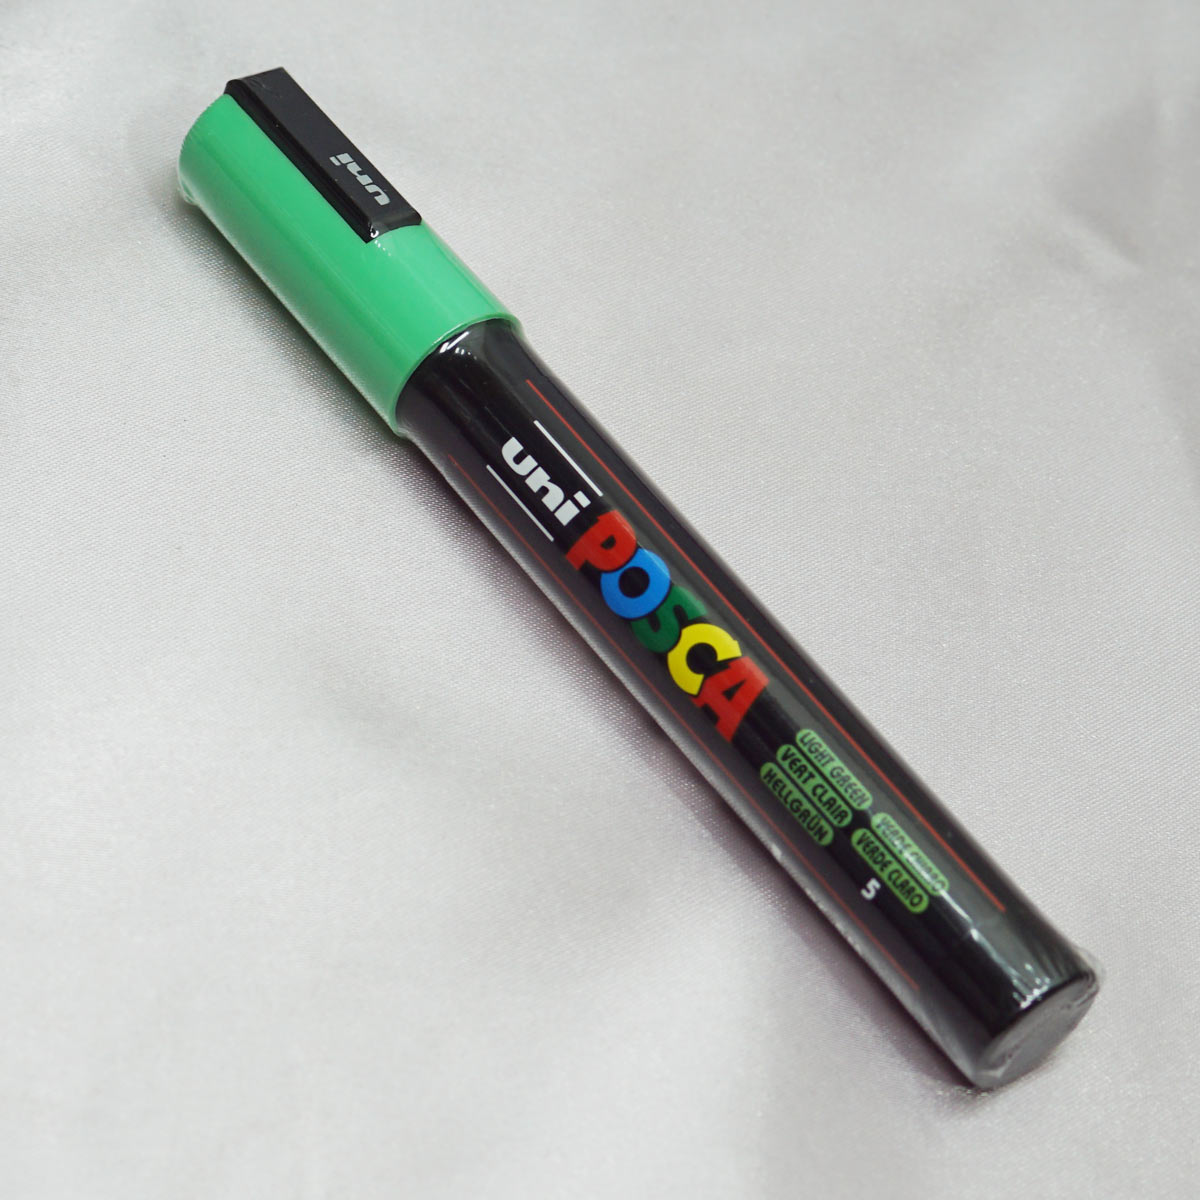 Uniball Posca PC-5M Bullet Medium Tip 1.8 - 2.5mm Opaque Light Green Color and Water Based Paint Marker SKU 22481